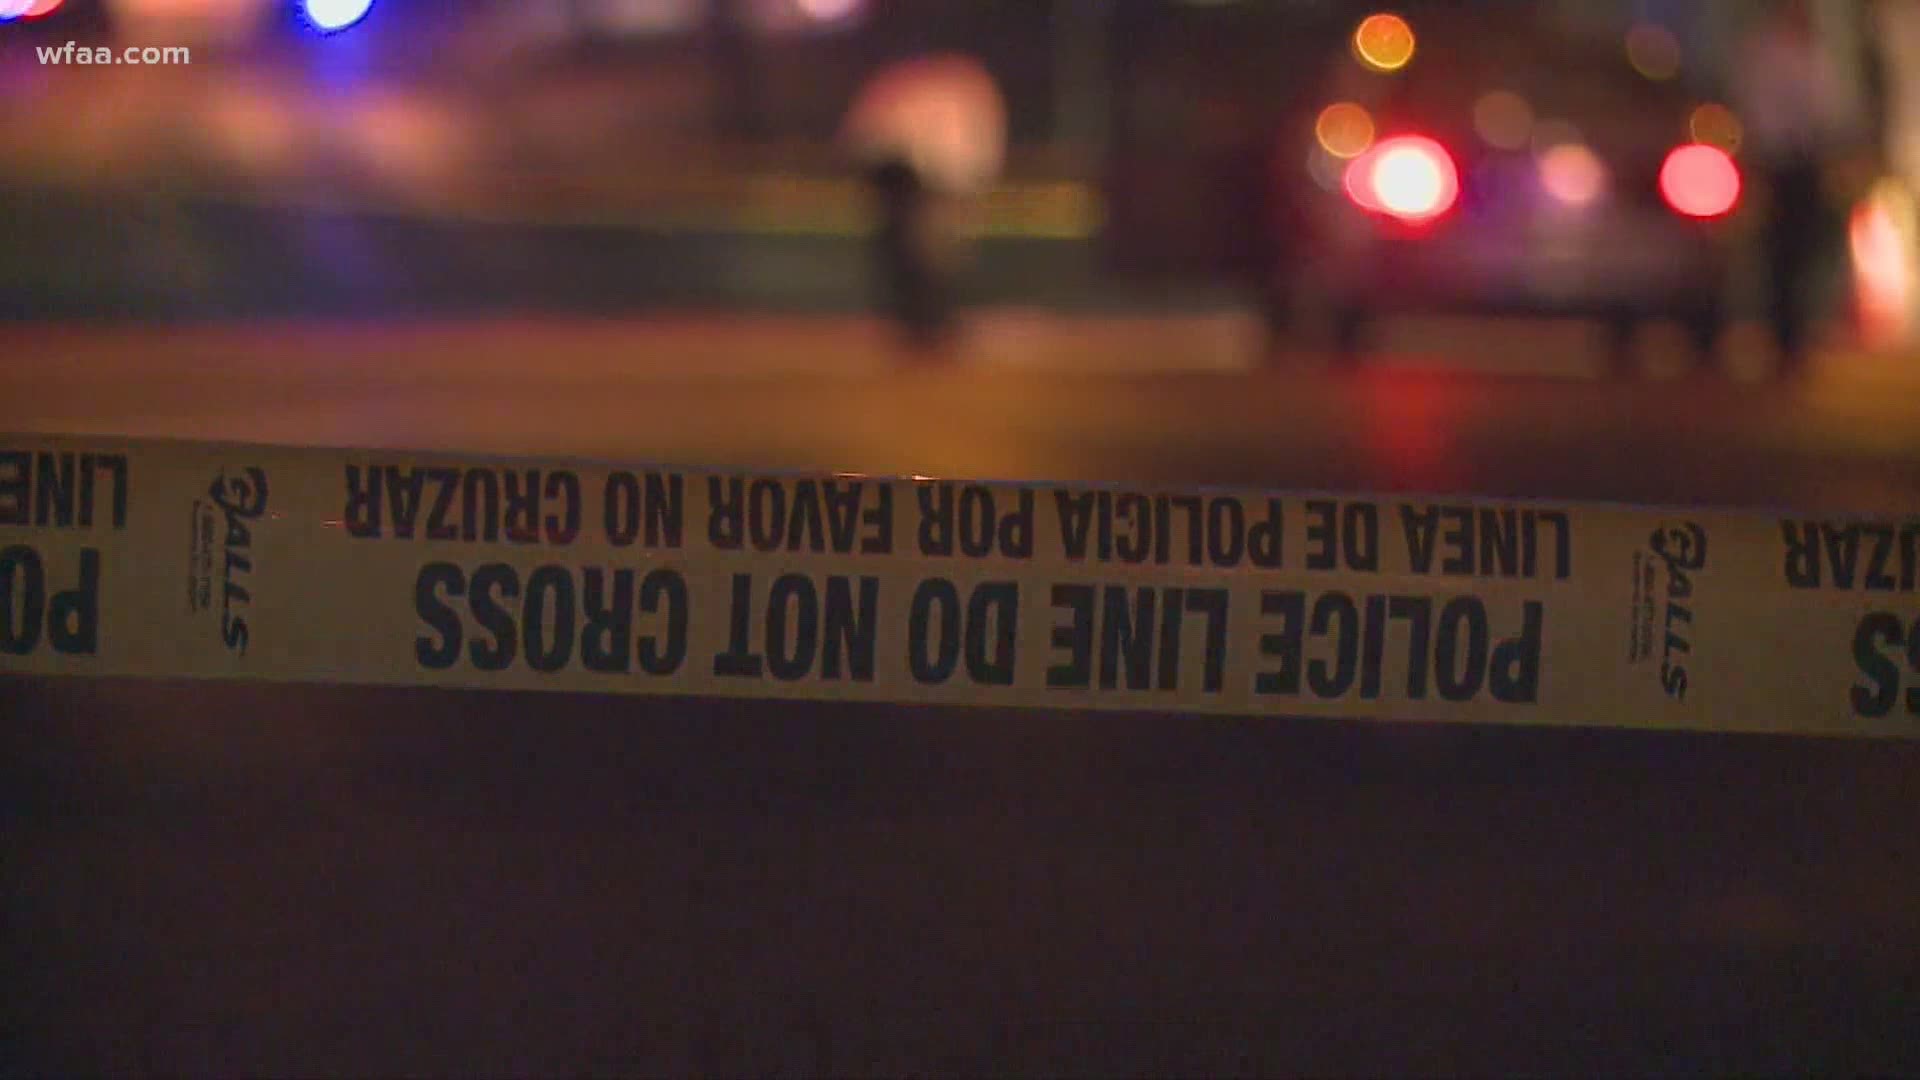 There were at least 13 shootings over the weekend that left seven people dead.